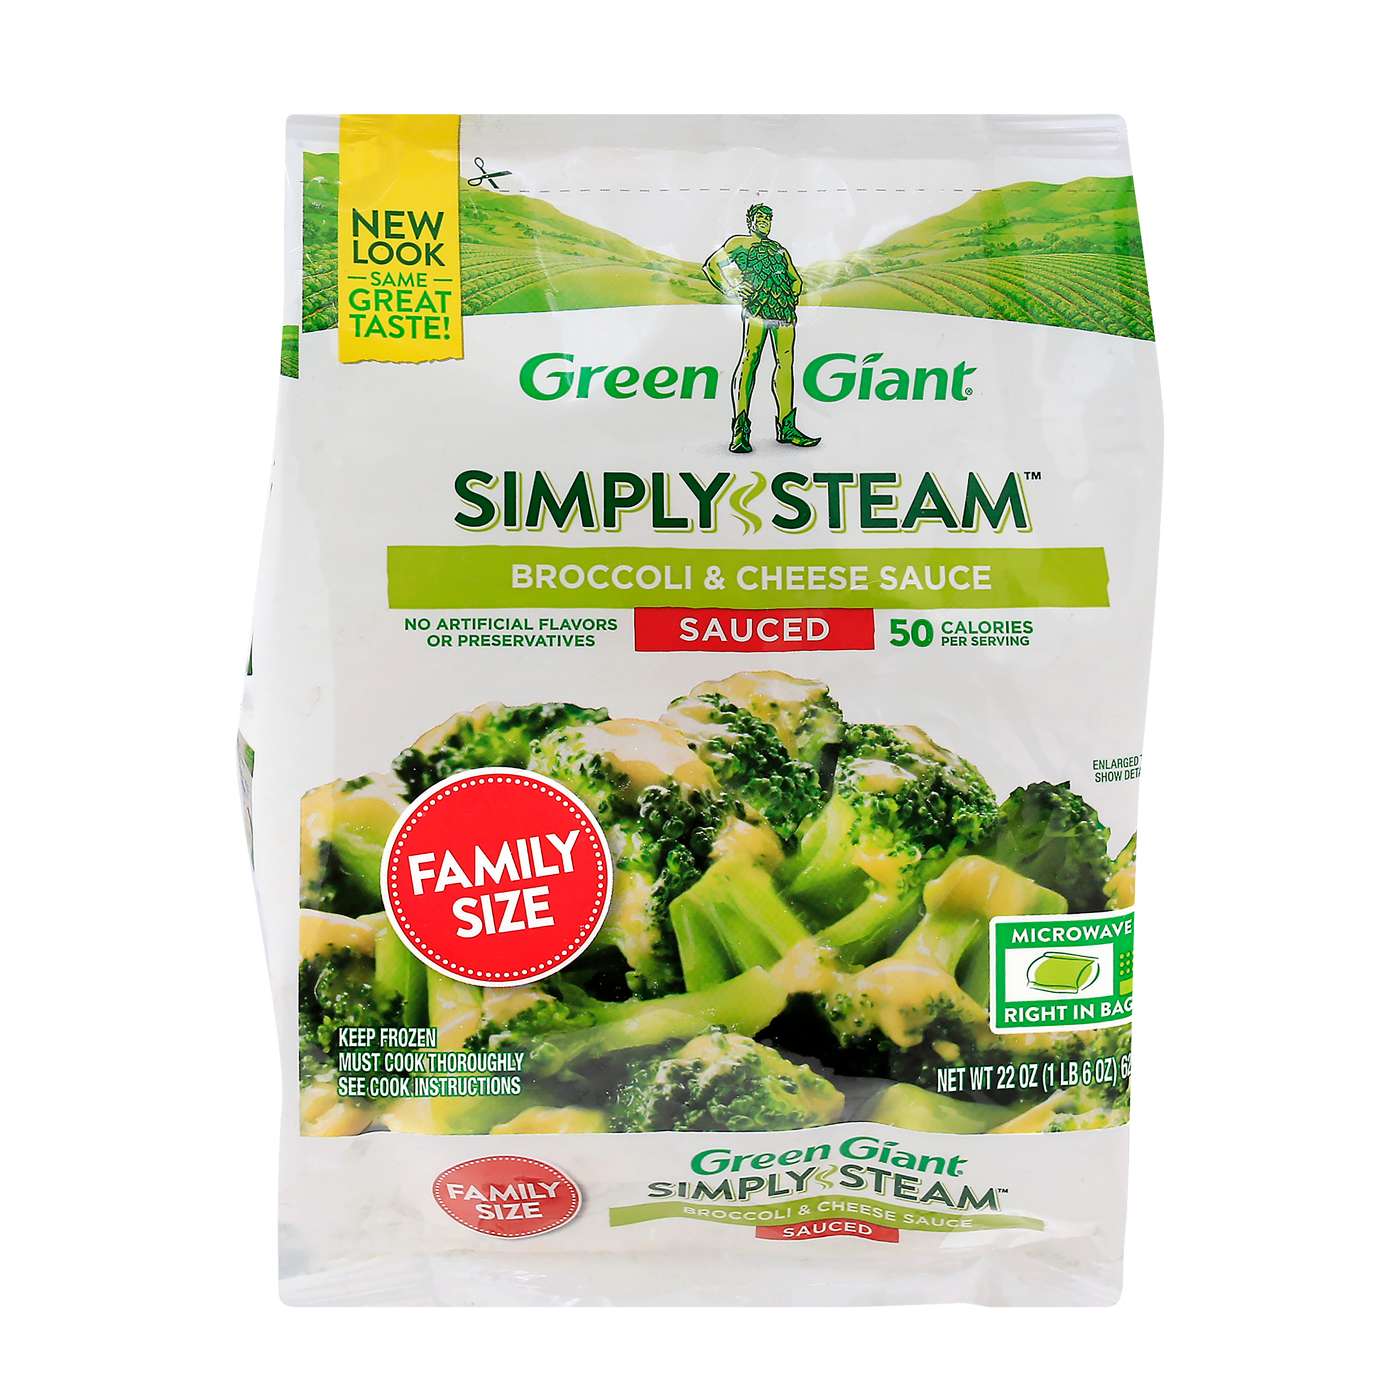 Green Giant Simply Steam Broccoli & Cheese Sauce Family Size; image 1 of 3